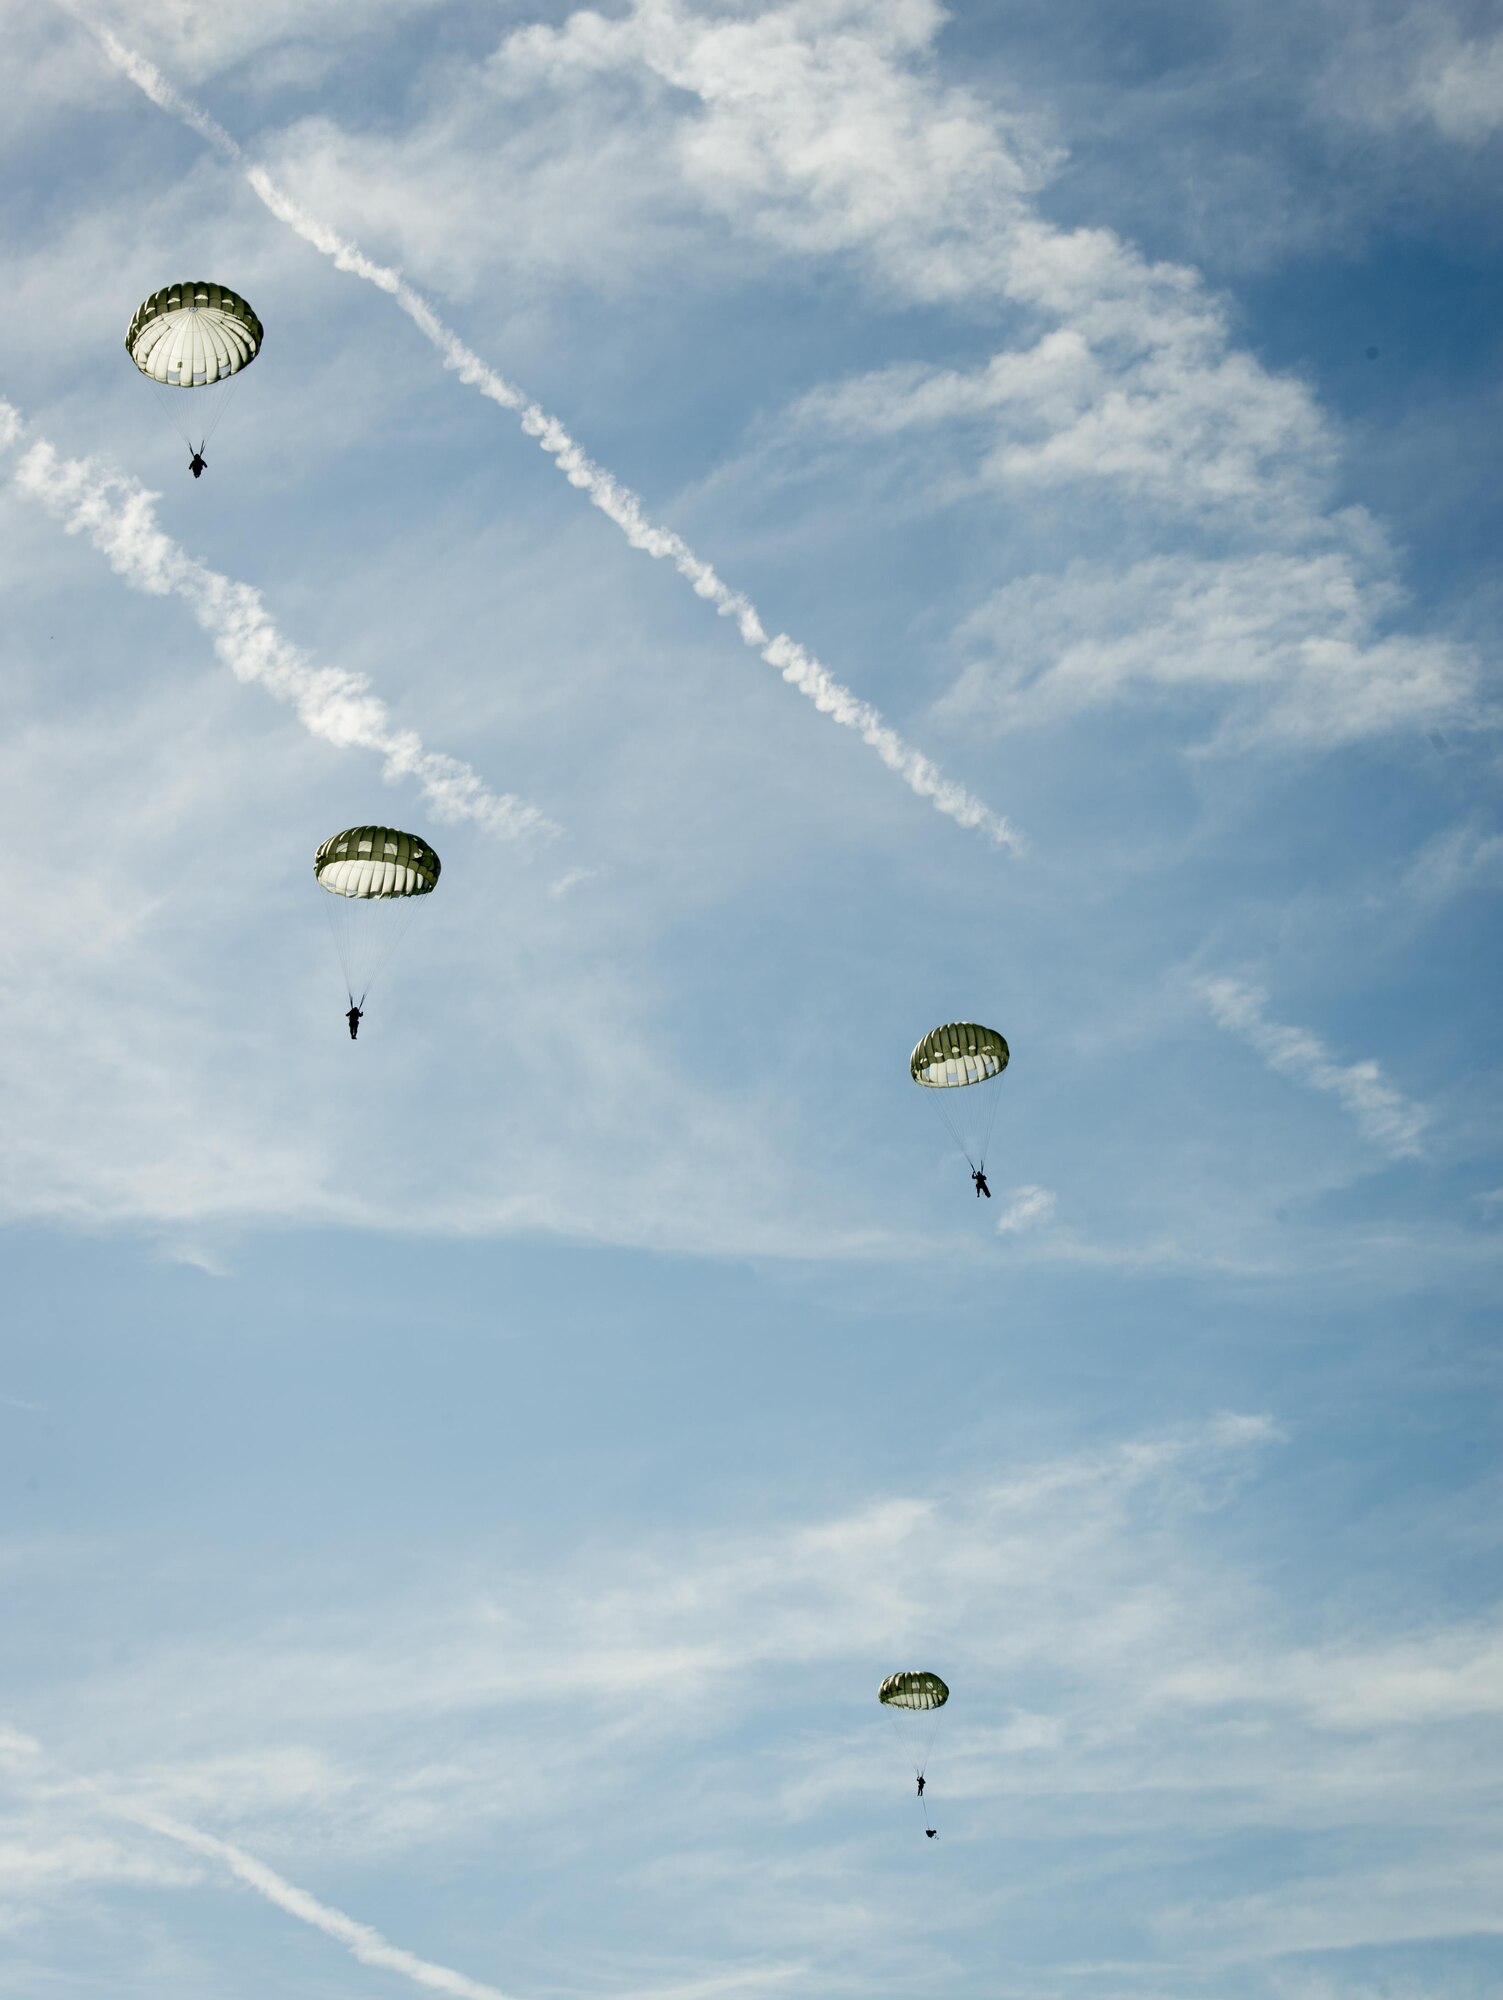 Service members from MacDill Air Force Base, Fla., parachute over Brooksville, Fla., July 15, 2017. During the operation, five to six service members jumped at a time using MC-6 type parachutes with T-11 reserve parachutes. (U.S. Air Force photo by Senior Airmen Mariette Adams)